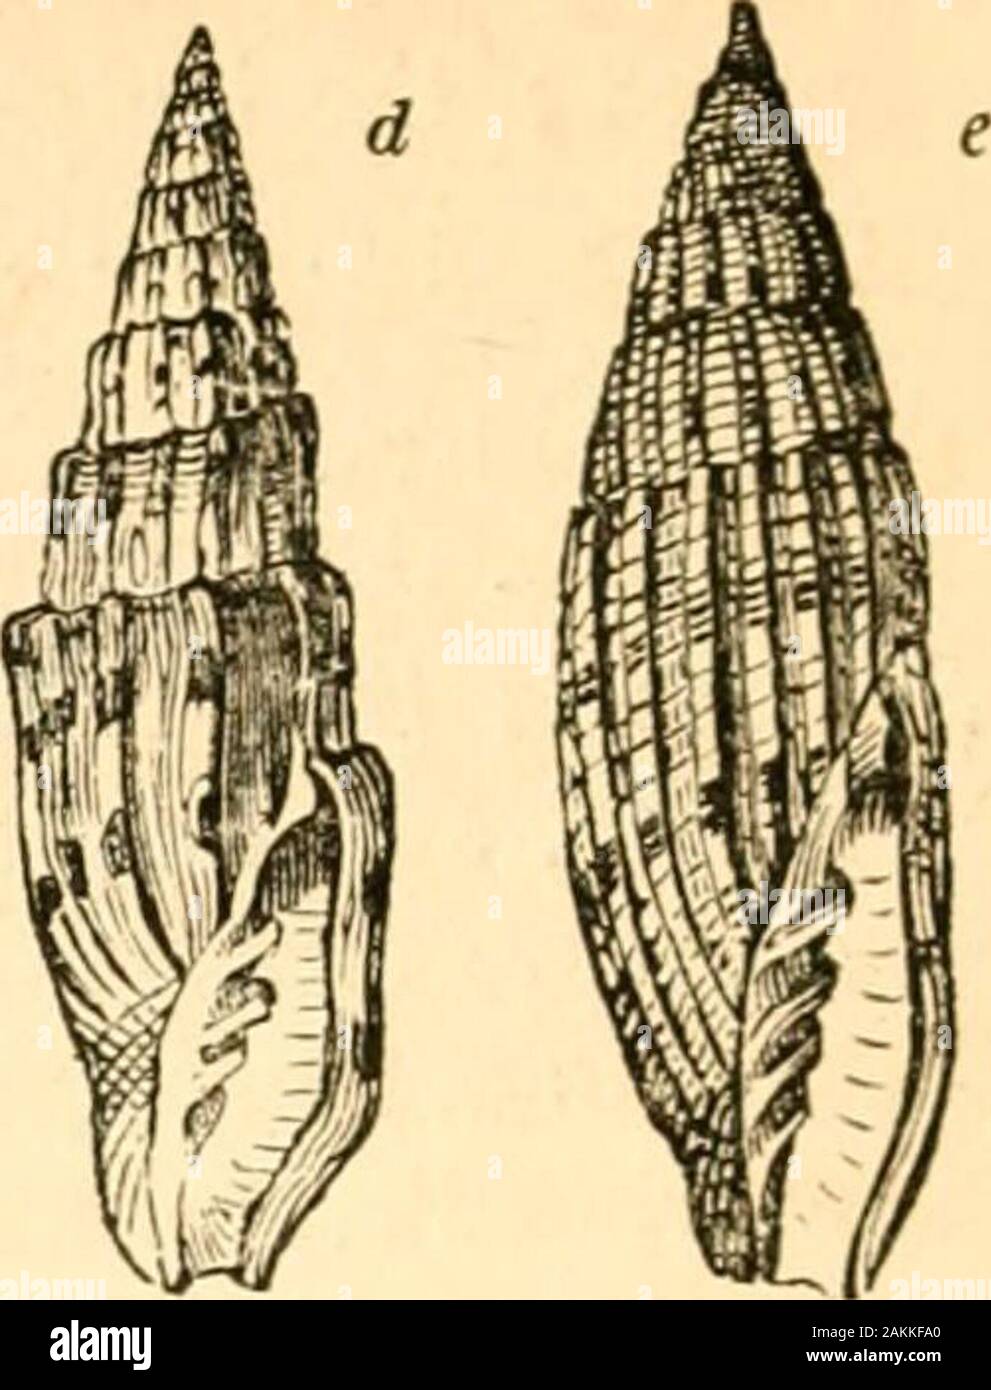 A treatise on malacology; or, Shells and shell fish . Costellaria Sw. Unequally fusiform ; the spire longerthan the aperture ; body-whorl slightly ventricose,but suddenly contracted near the base ; internal striaedistinct; whorls convex, rarely angulated j the ribsreaching to the suture, {^fig. 84.6?.) C. rigida. Zool. 111. 1st Series, pi. 29. Callithea Sw. Spire and aperture of nearly equal length ;internal channel nearly obsolete ; shell with longi-tudinal linear ribs, crossed with transverse striae andbands ; base contracted, {fig. 84. e.) sanguisuga. En.Meth. 373.f. 10. stigmataria. Chem. Stock Photo